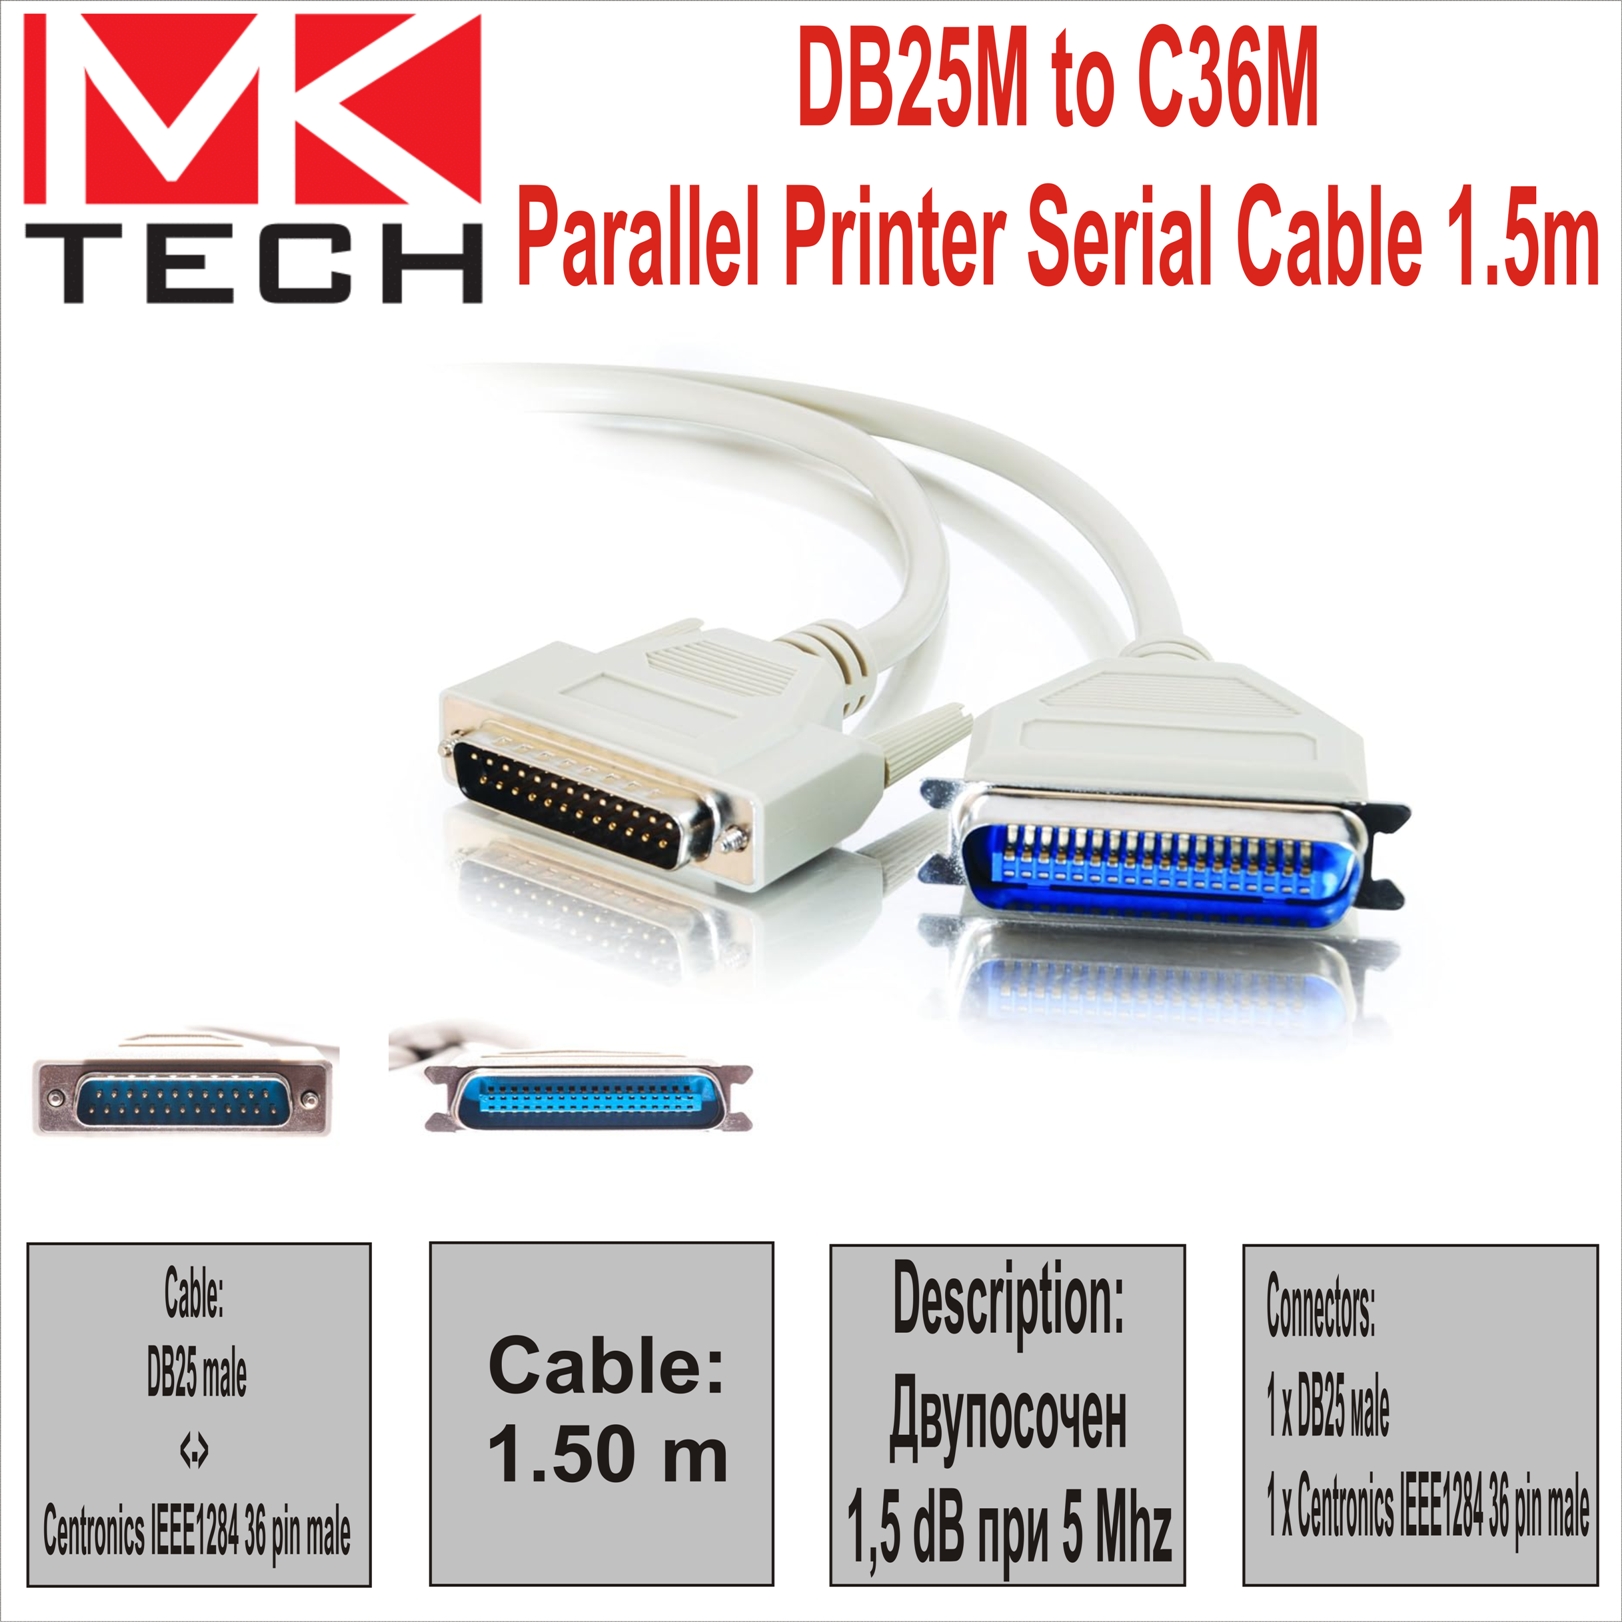 DB25M to C36M Parallel Cable 1.5m MKTECH